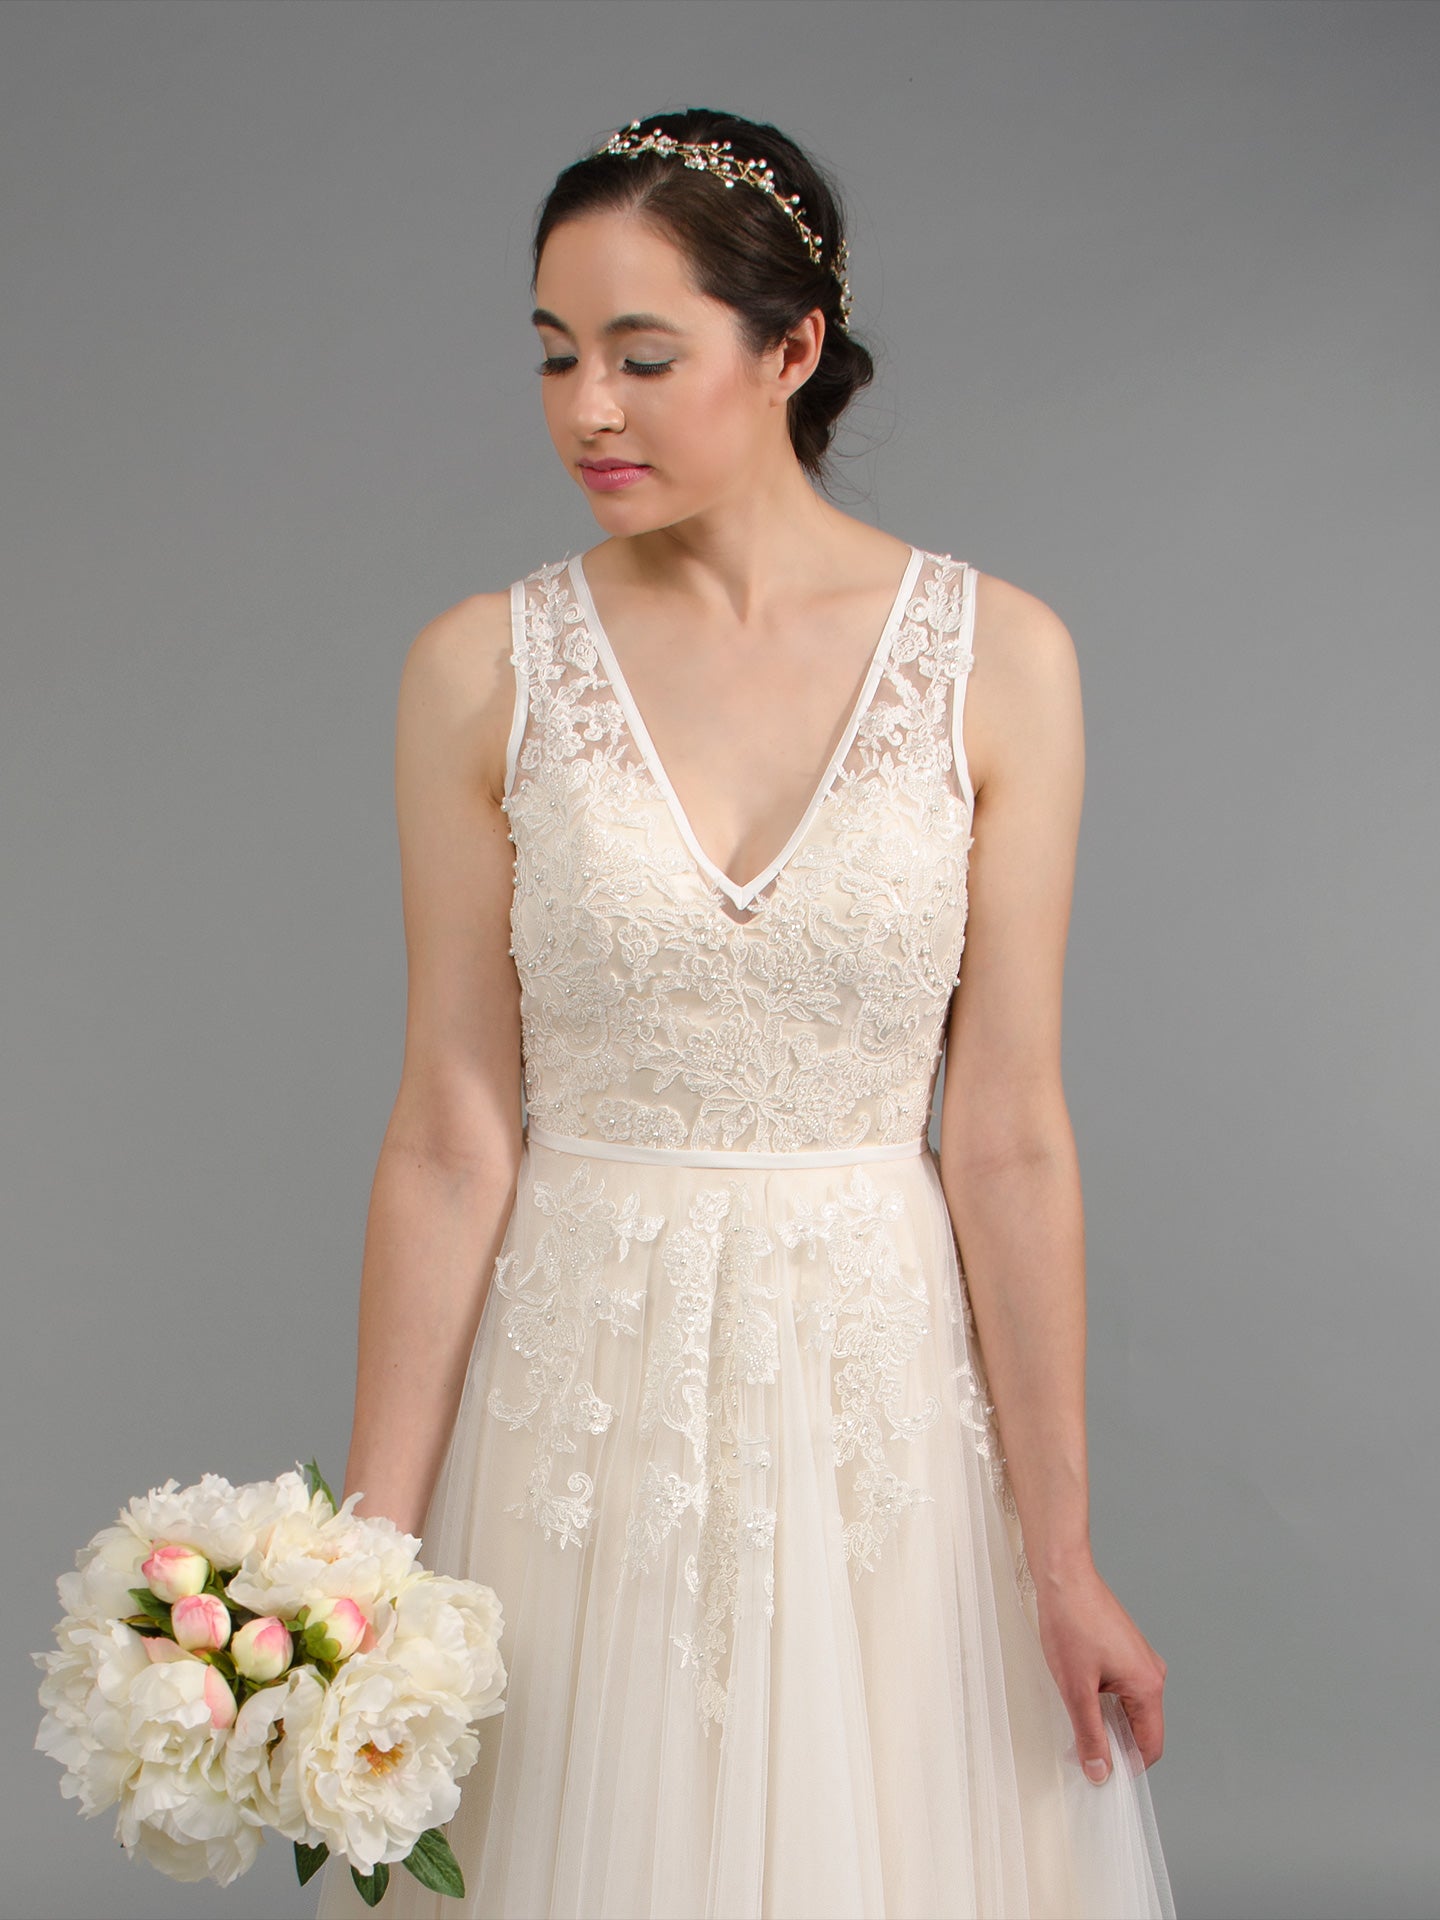 V neck lace wedding dress with tulle skirts 4045